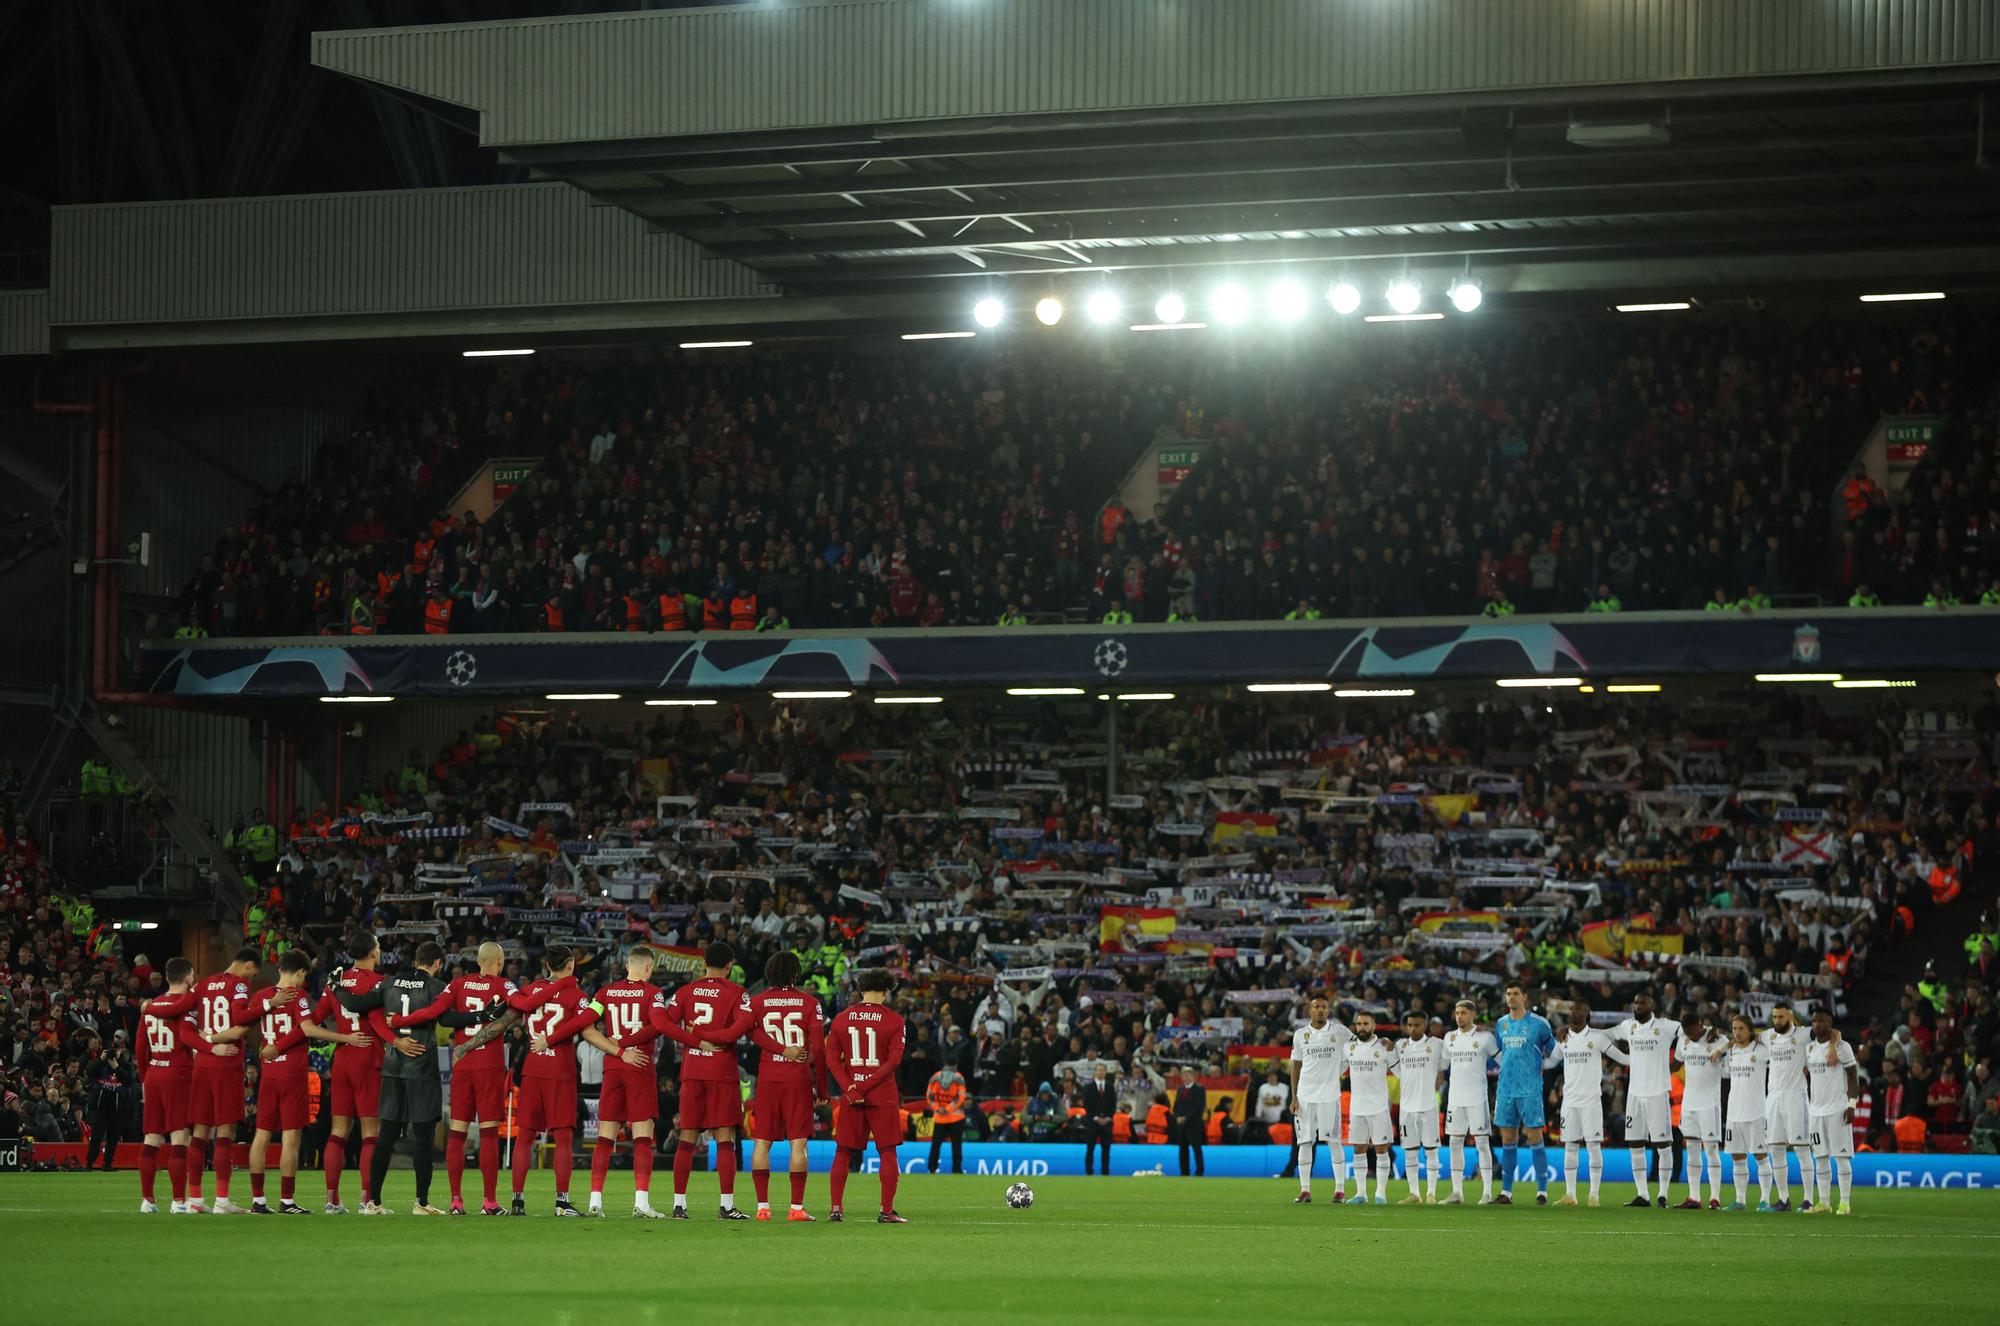 Champions League - Round of 16 First Leg - Liverpool v Real Madrid